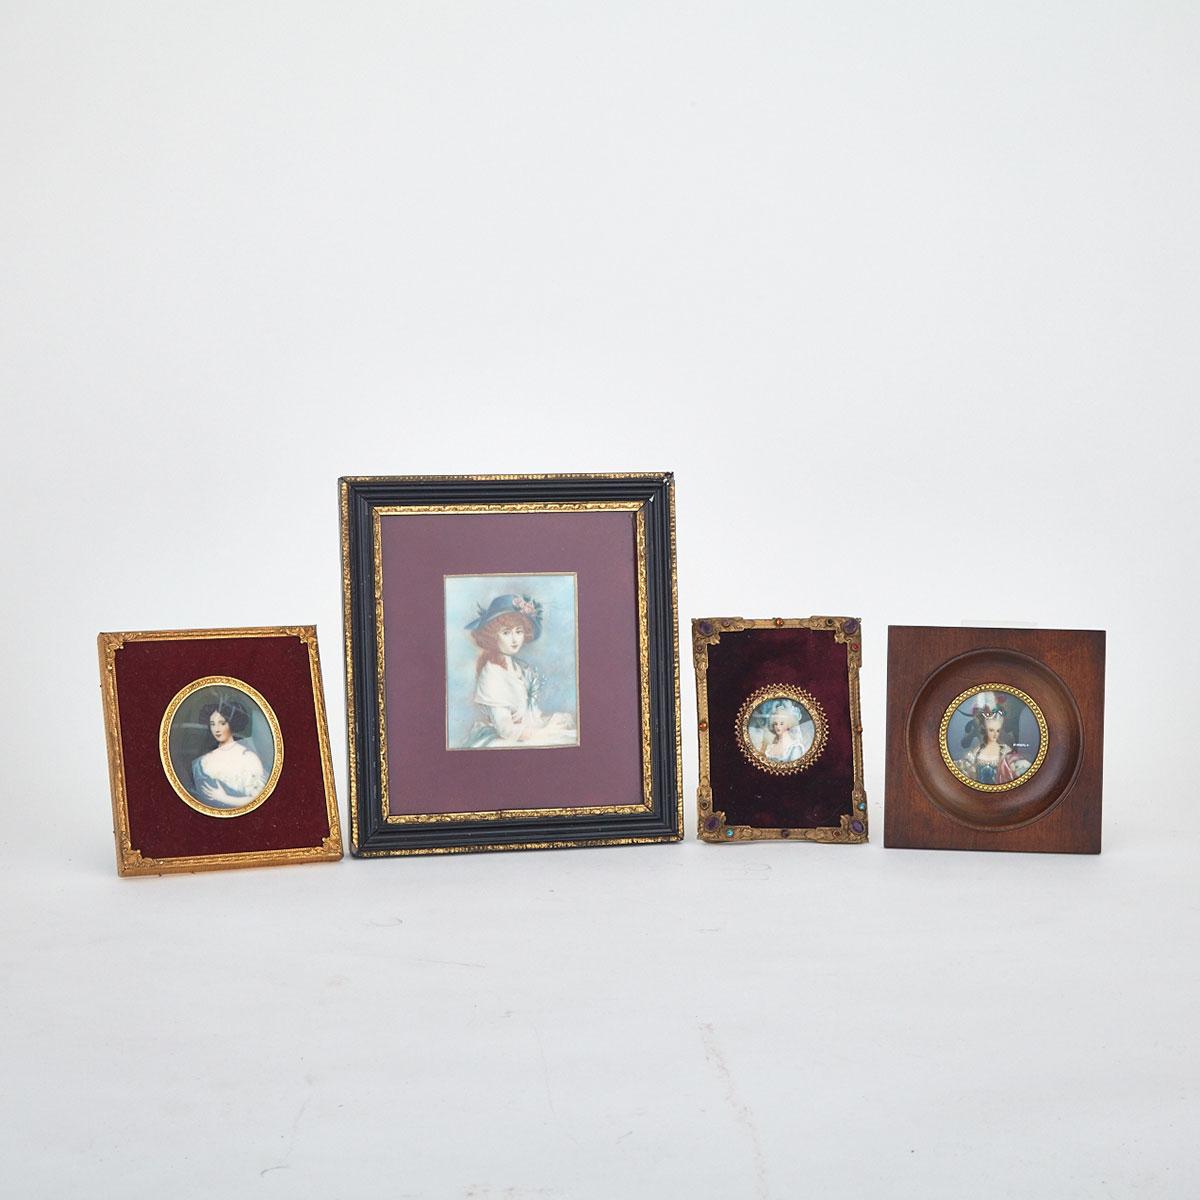 Group of Four Portrait Miniatures on Ivory of Gentlewomen, 19th century